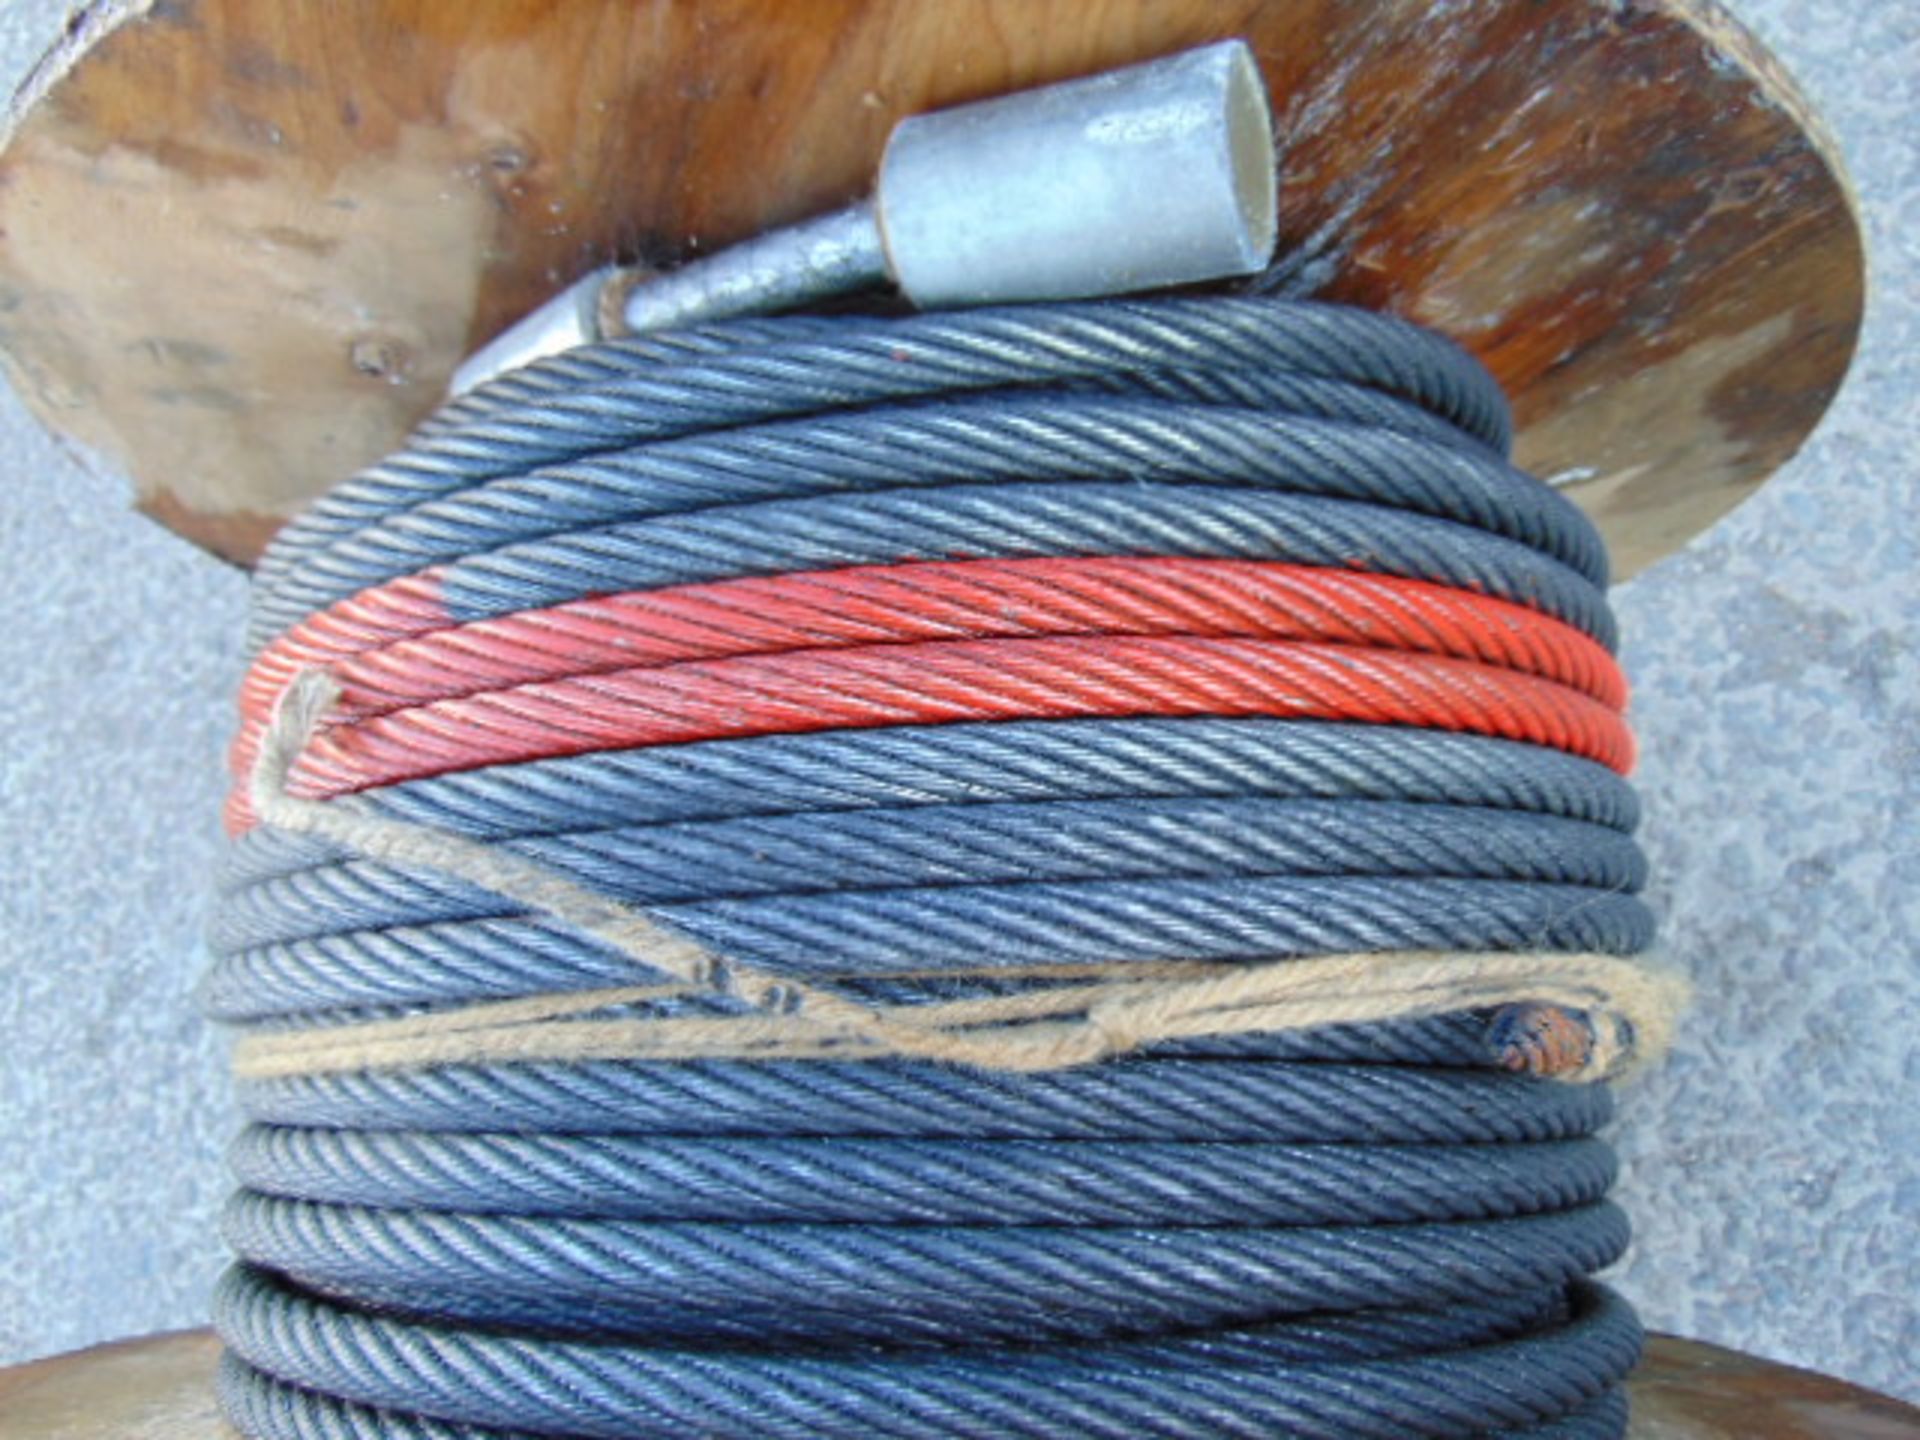 Heavy Duty Roll of 16mm 80m Crane/Winch Wire Rope Drum - Image 2 of 4